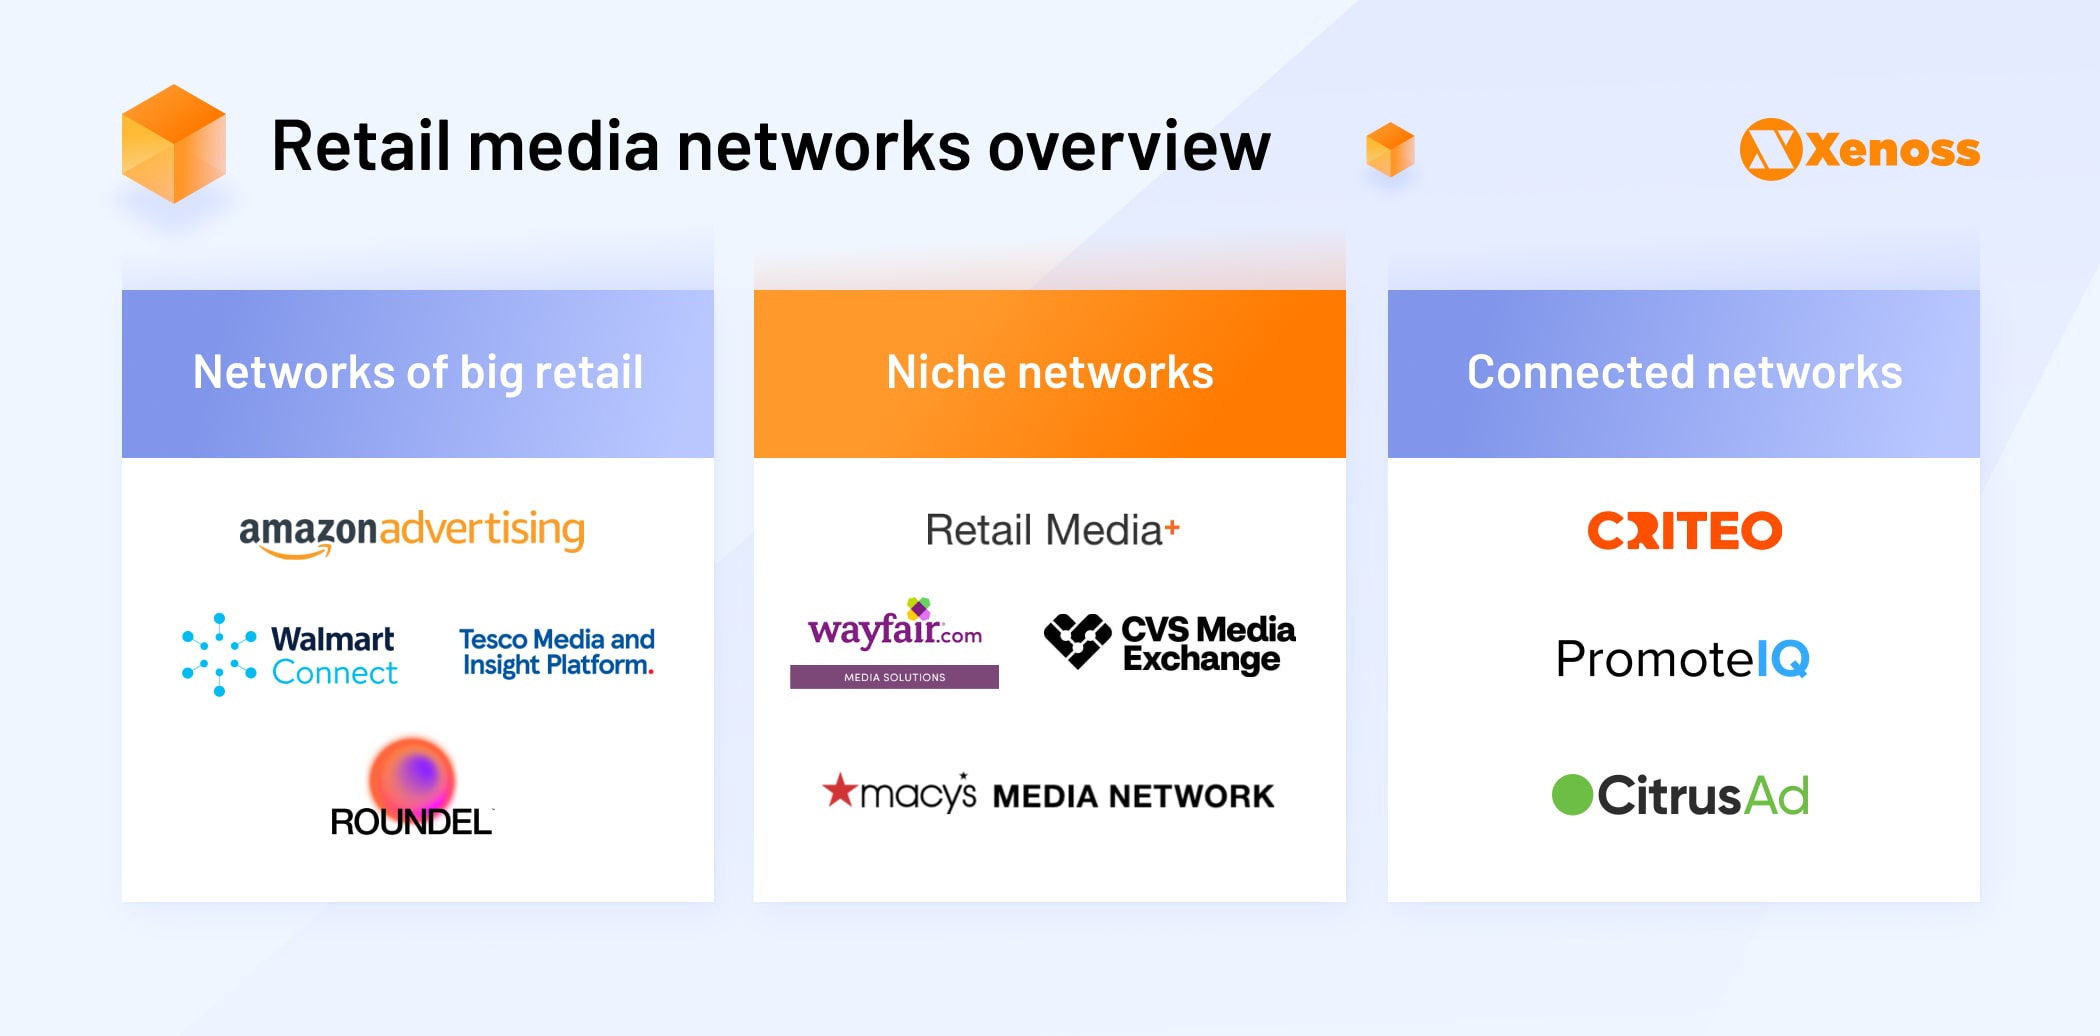 Retail media networks overview -Xenoss blog